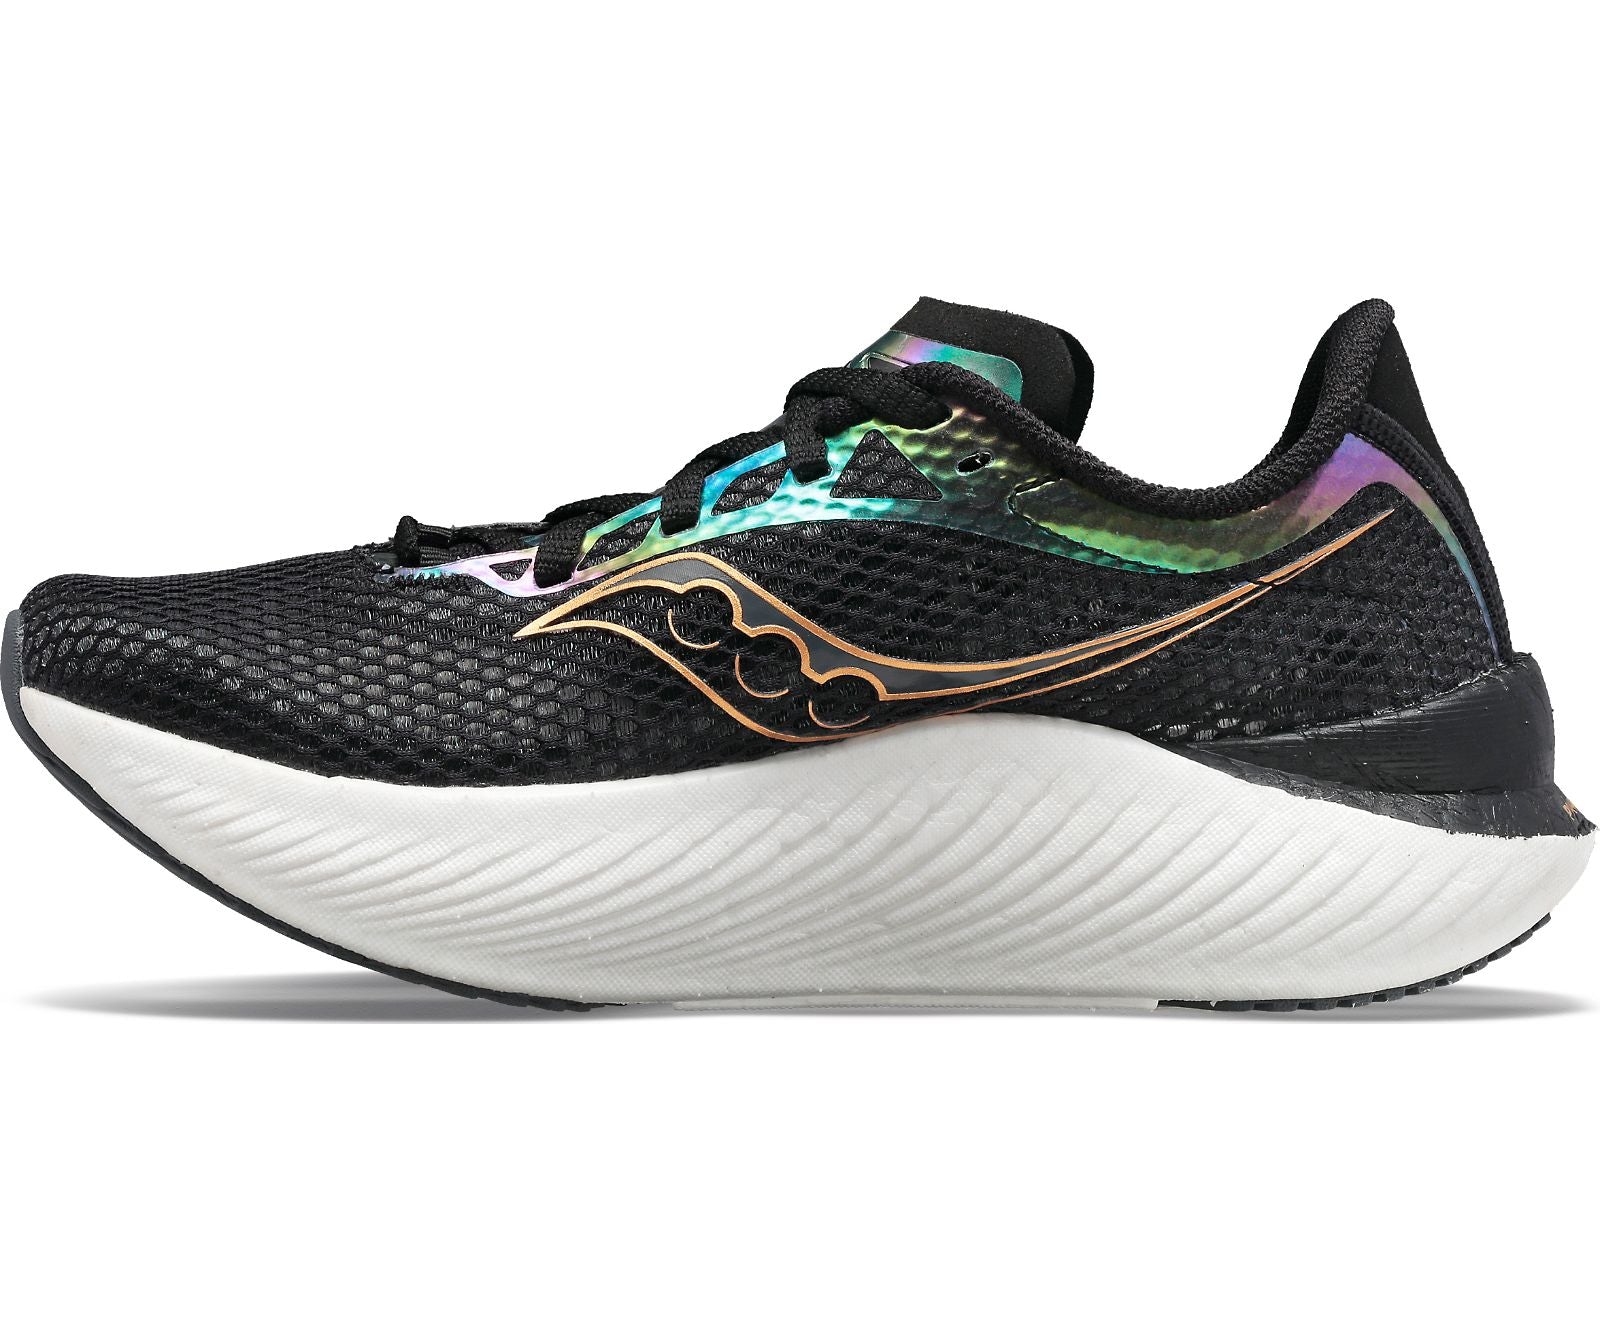 Medial view of the Men's Endorphin Pro 3 by Saucony in the color Black/Goldstruck